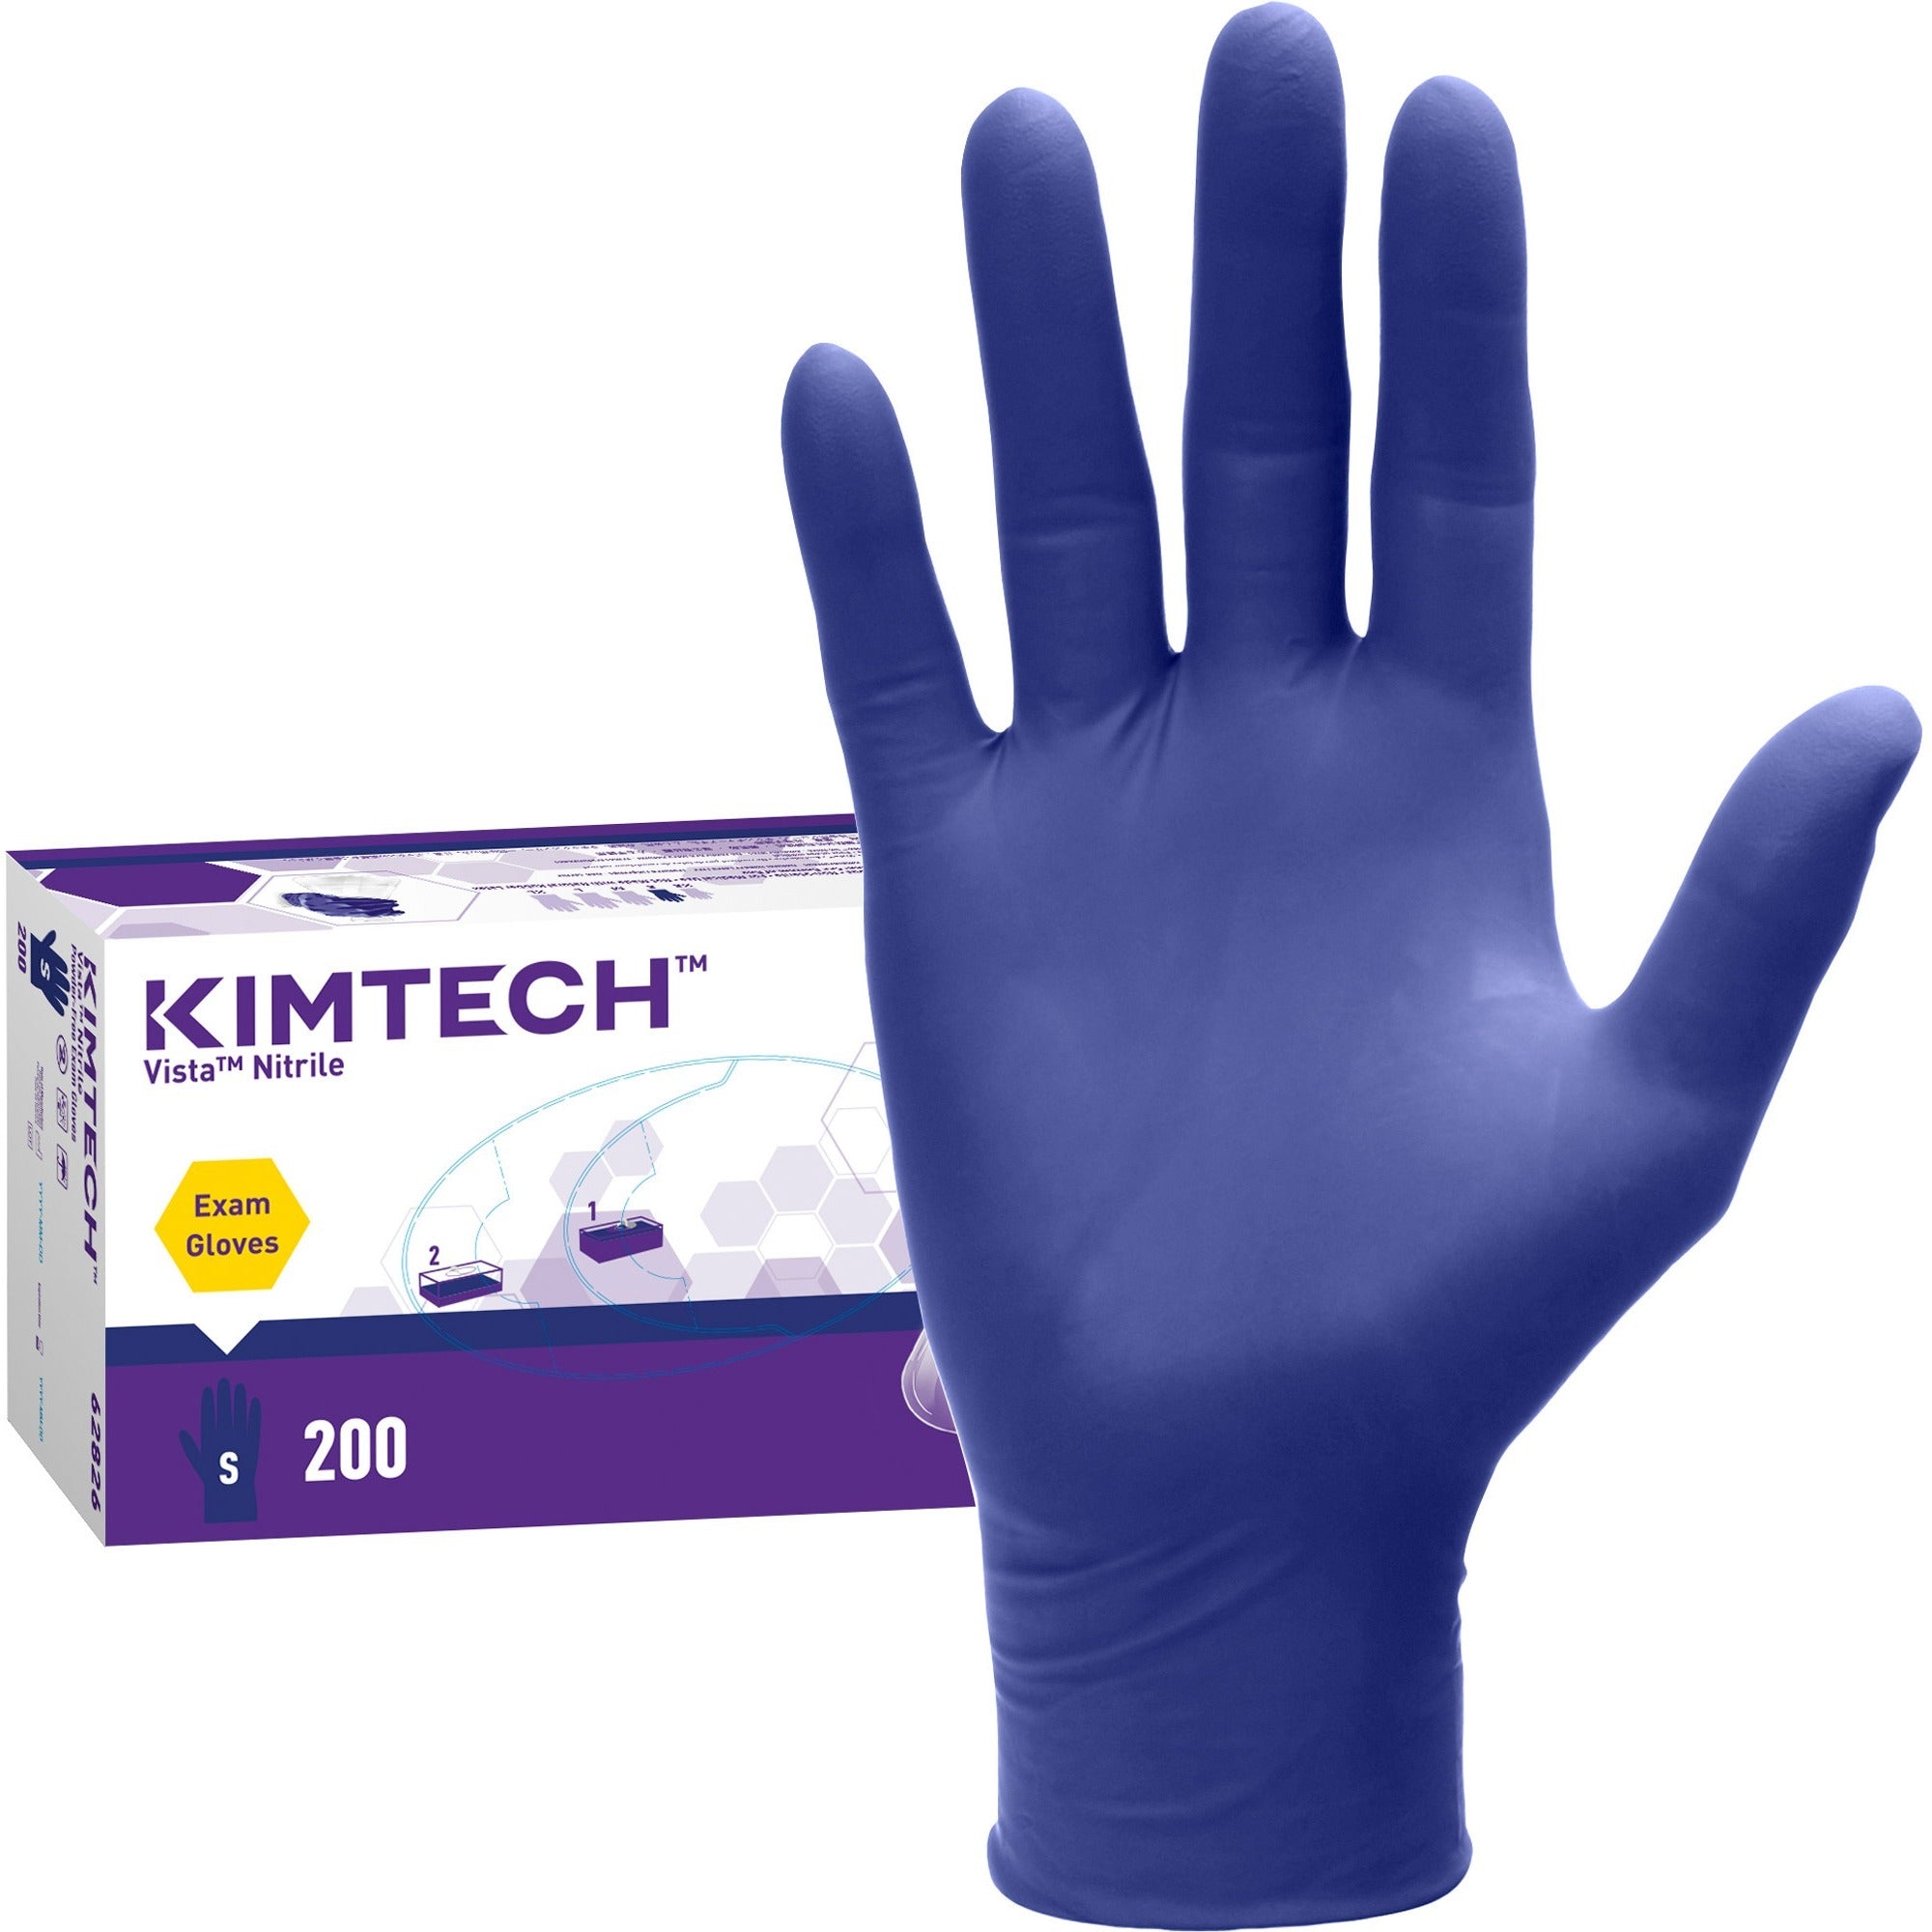 kimtech-vista-nitrile-exam-gloves-small-size-nitrile-blue-recyclable-textured-fingertip-powdered-non-sterile-for-laboratory-application-200-box-47-mil-thickness-950-glove-length_kcc62826 - 1